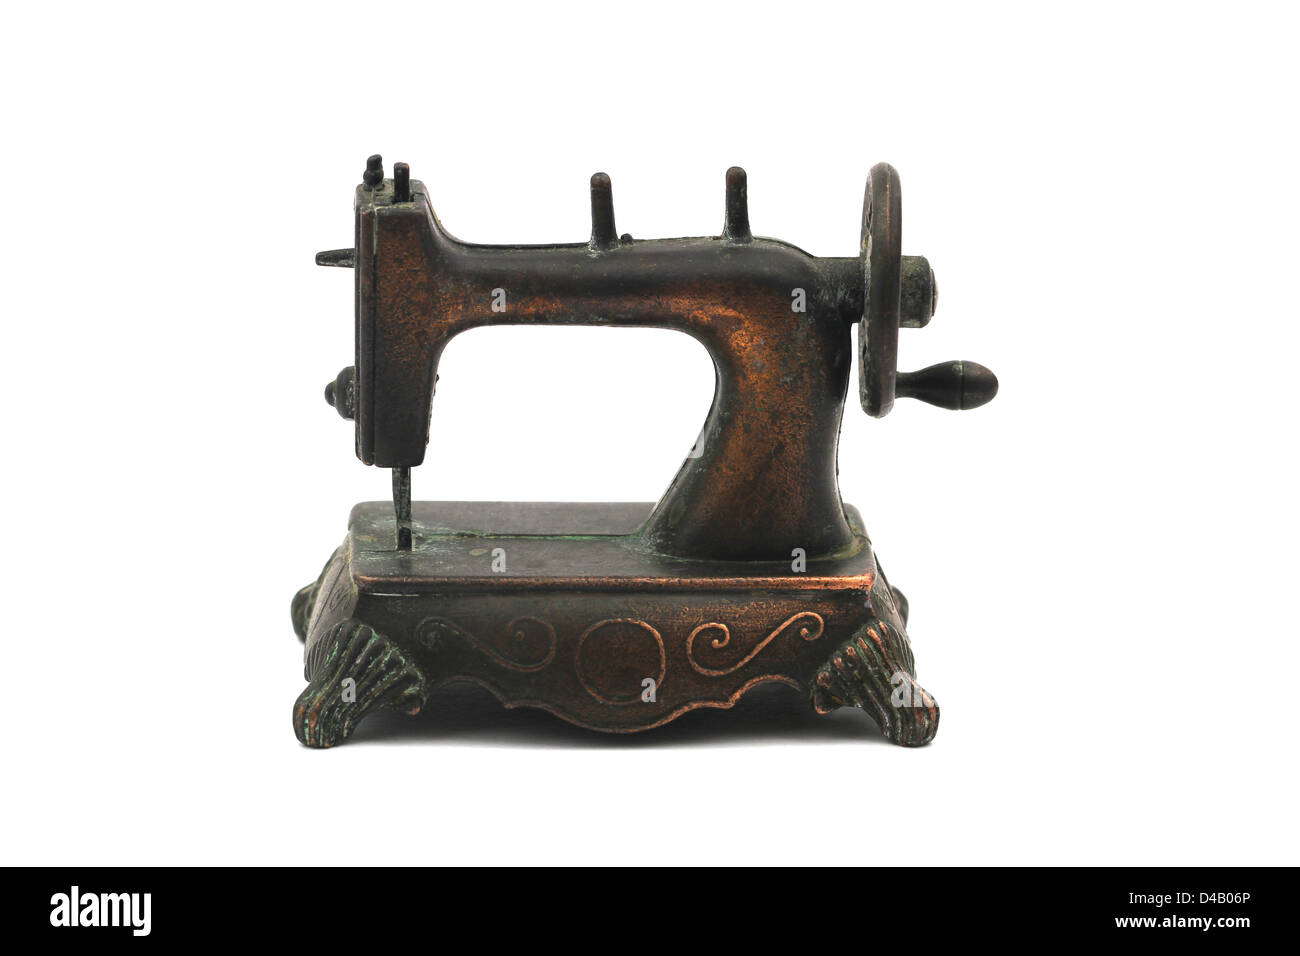 Brass vintage pencil sharpener in shape of sewing machine Stock Photo